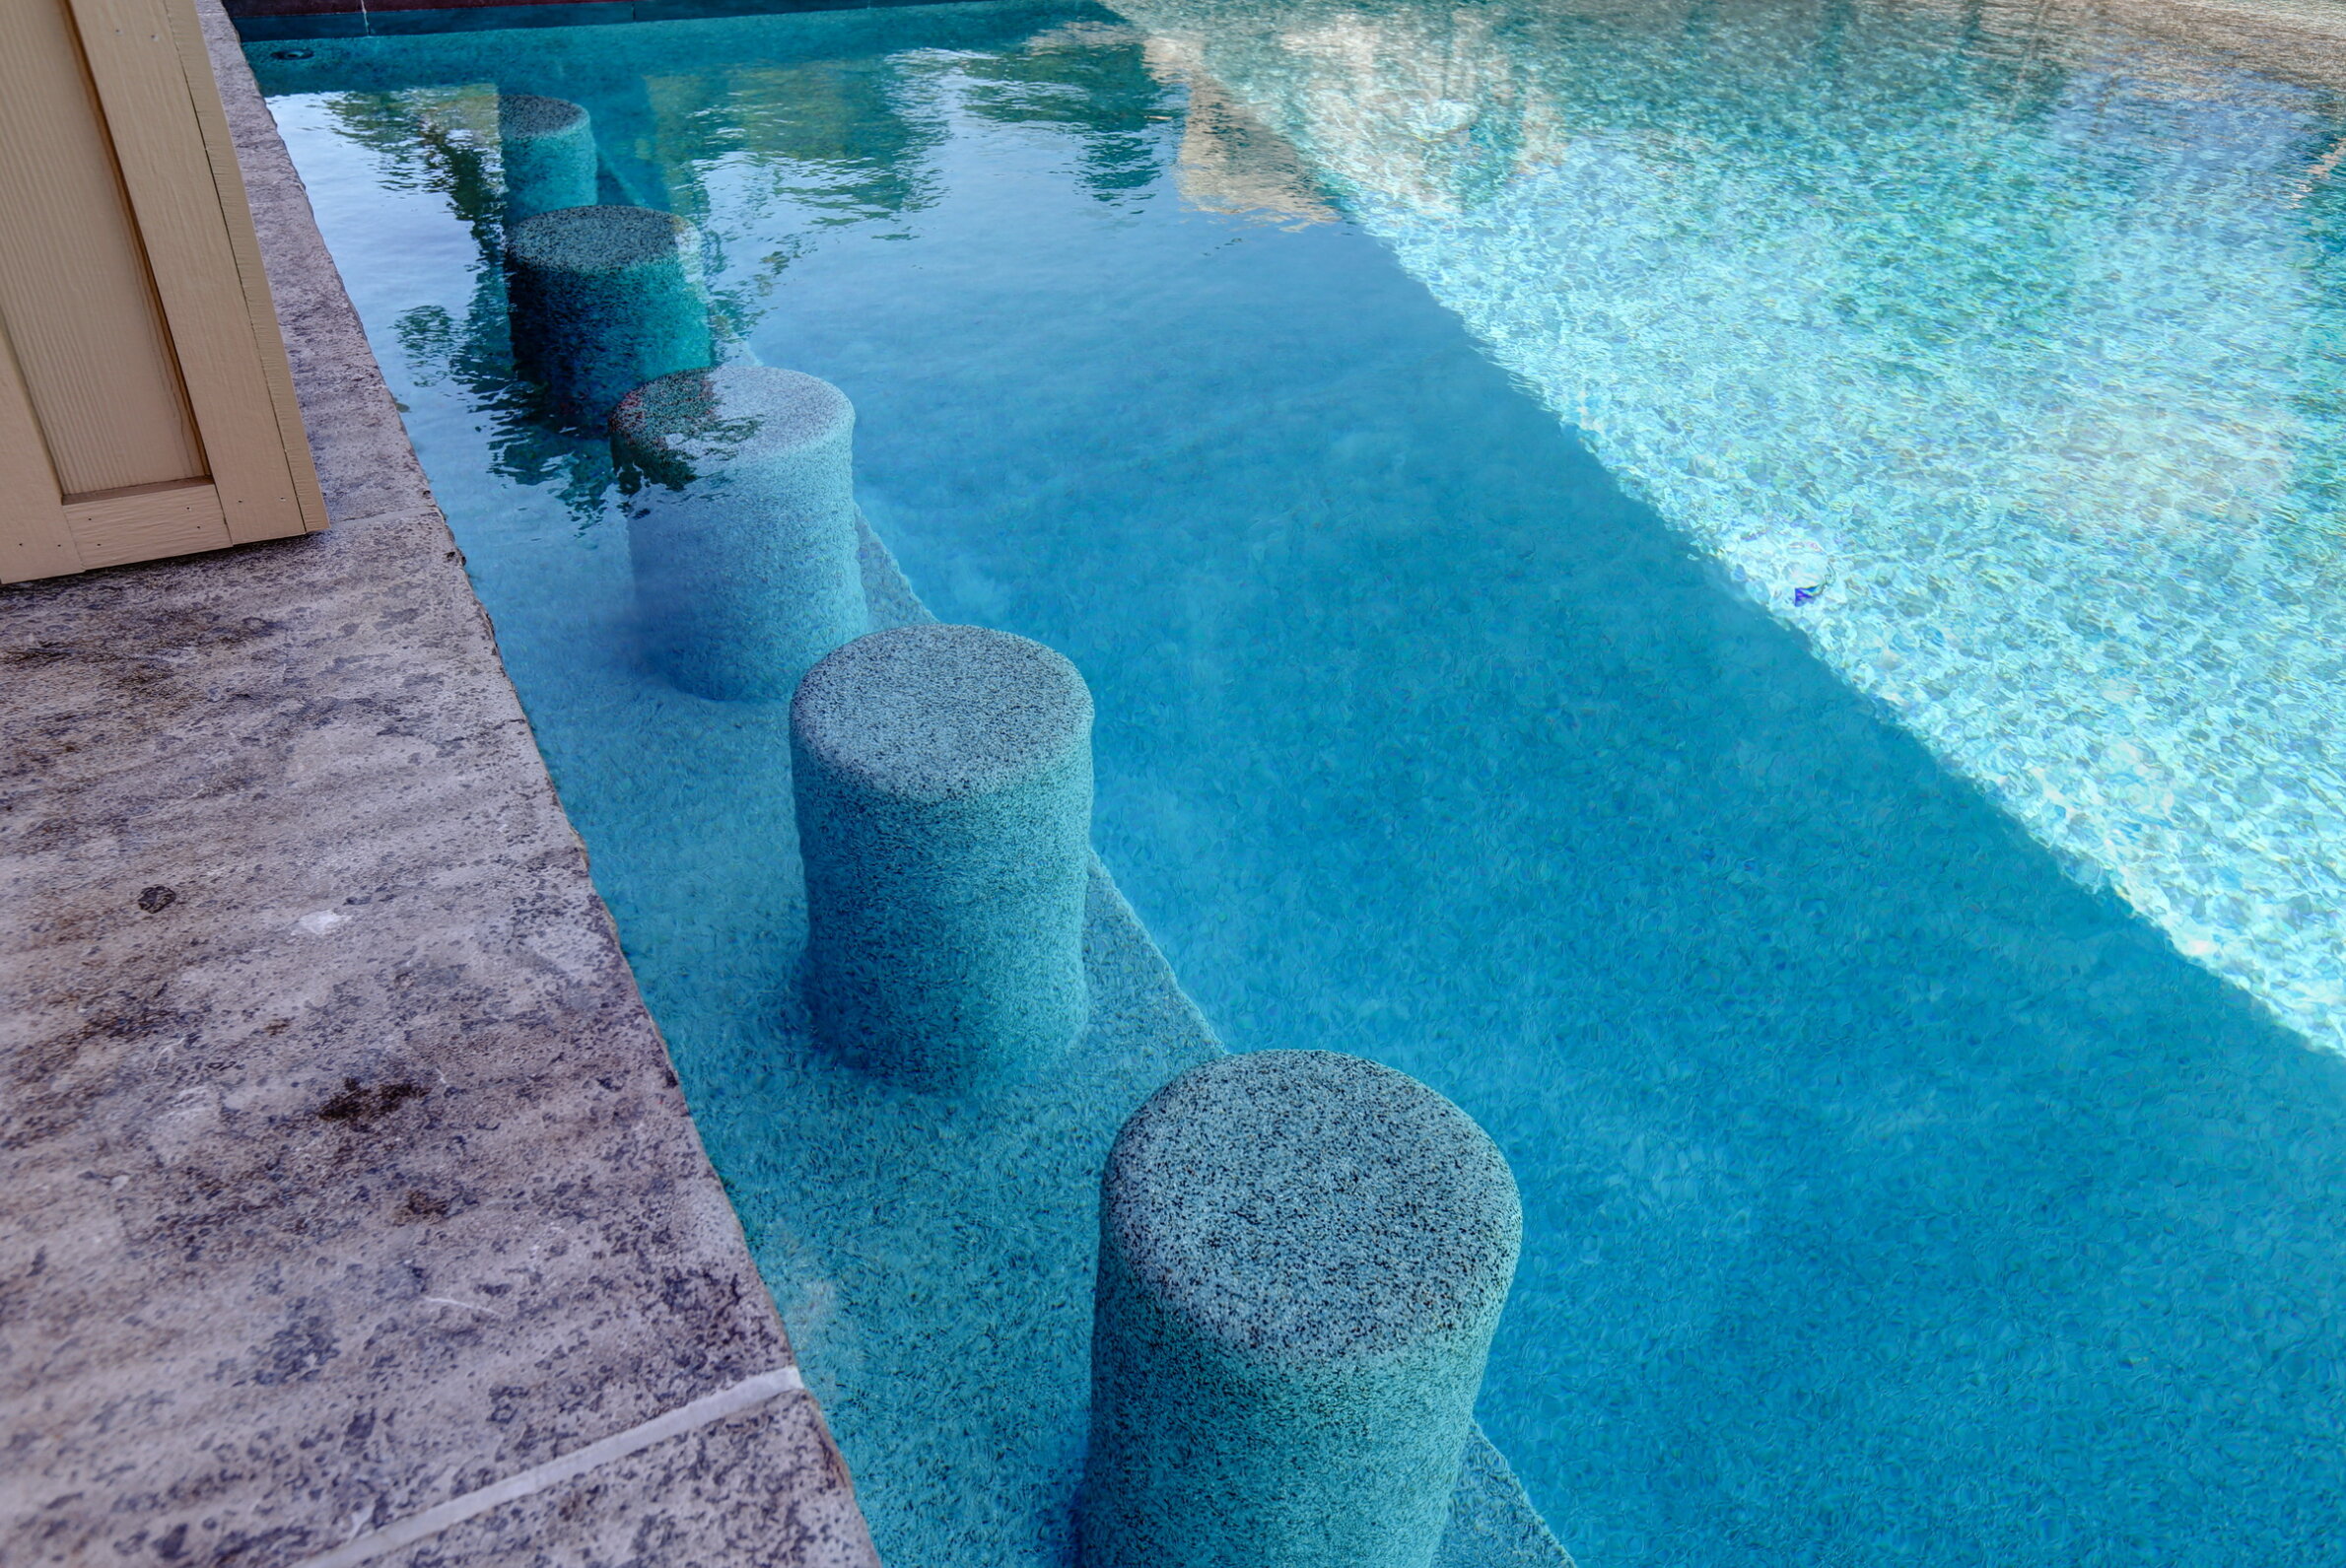 A series of rounded stone steps lead across the clear, blue water of a tranquil swimming pool adjacent to a concrete patio.